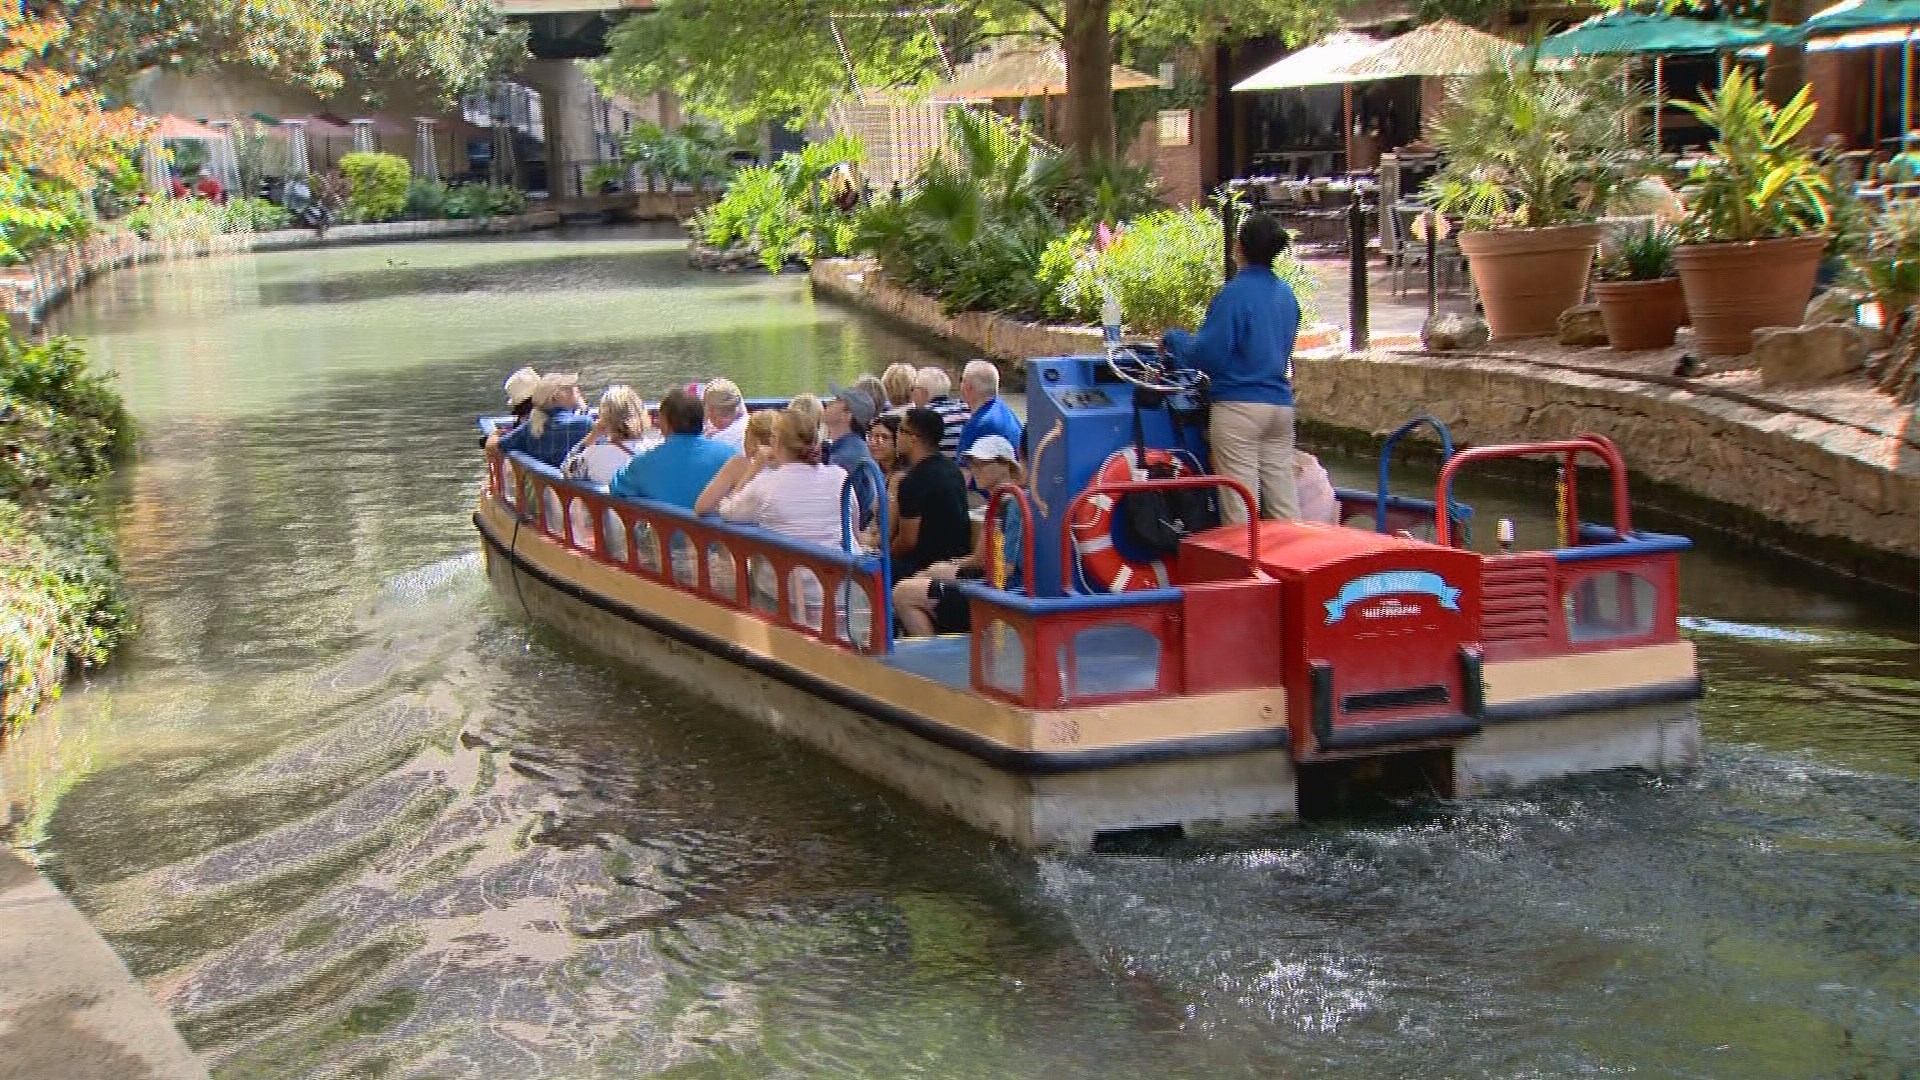 Committee to review Buena Vista Barges appeal in River Walk deal - KENS 5 TV